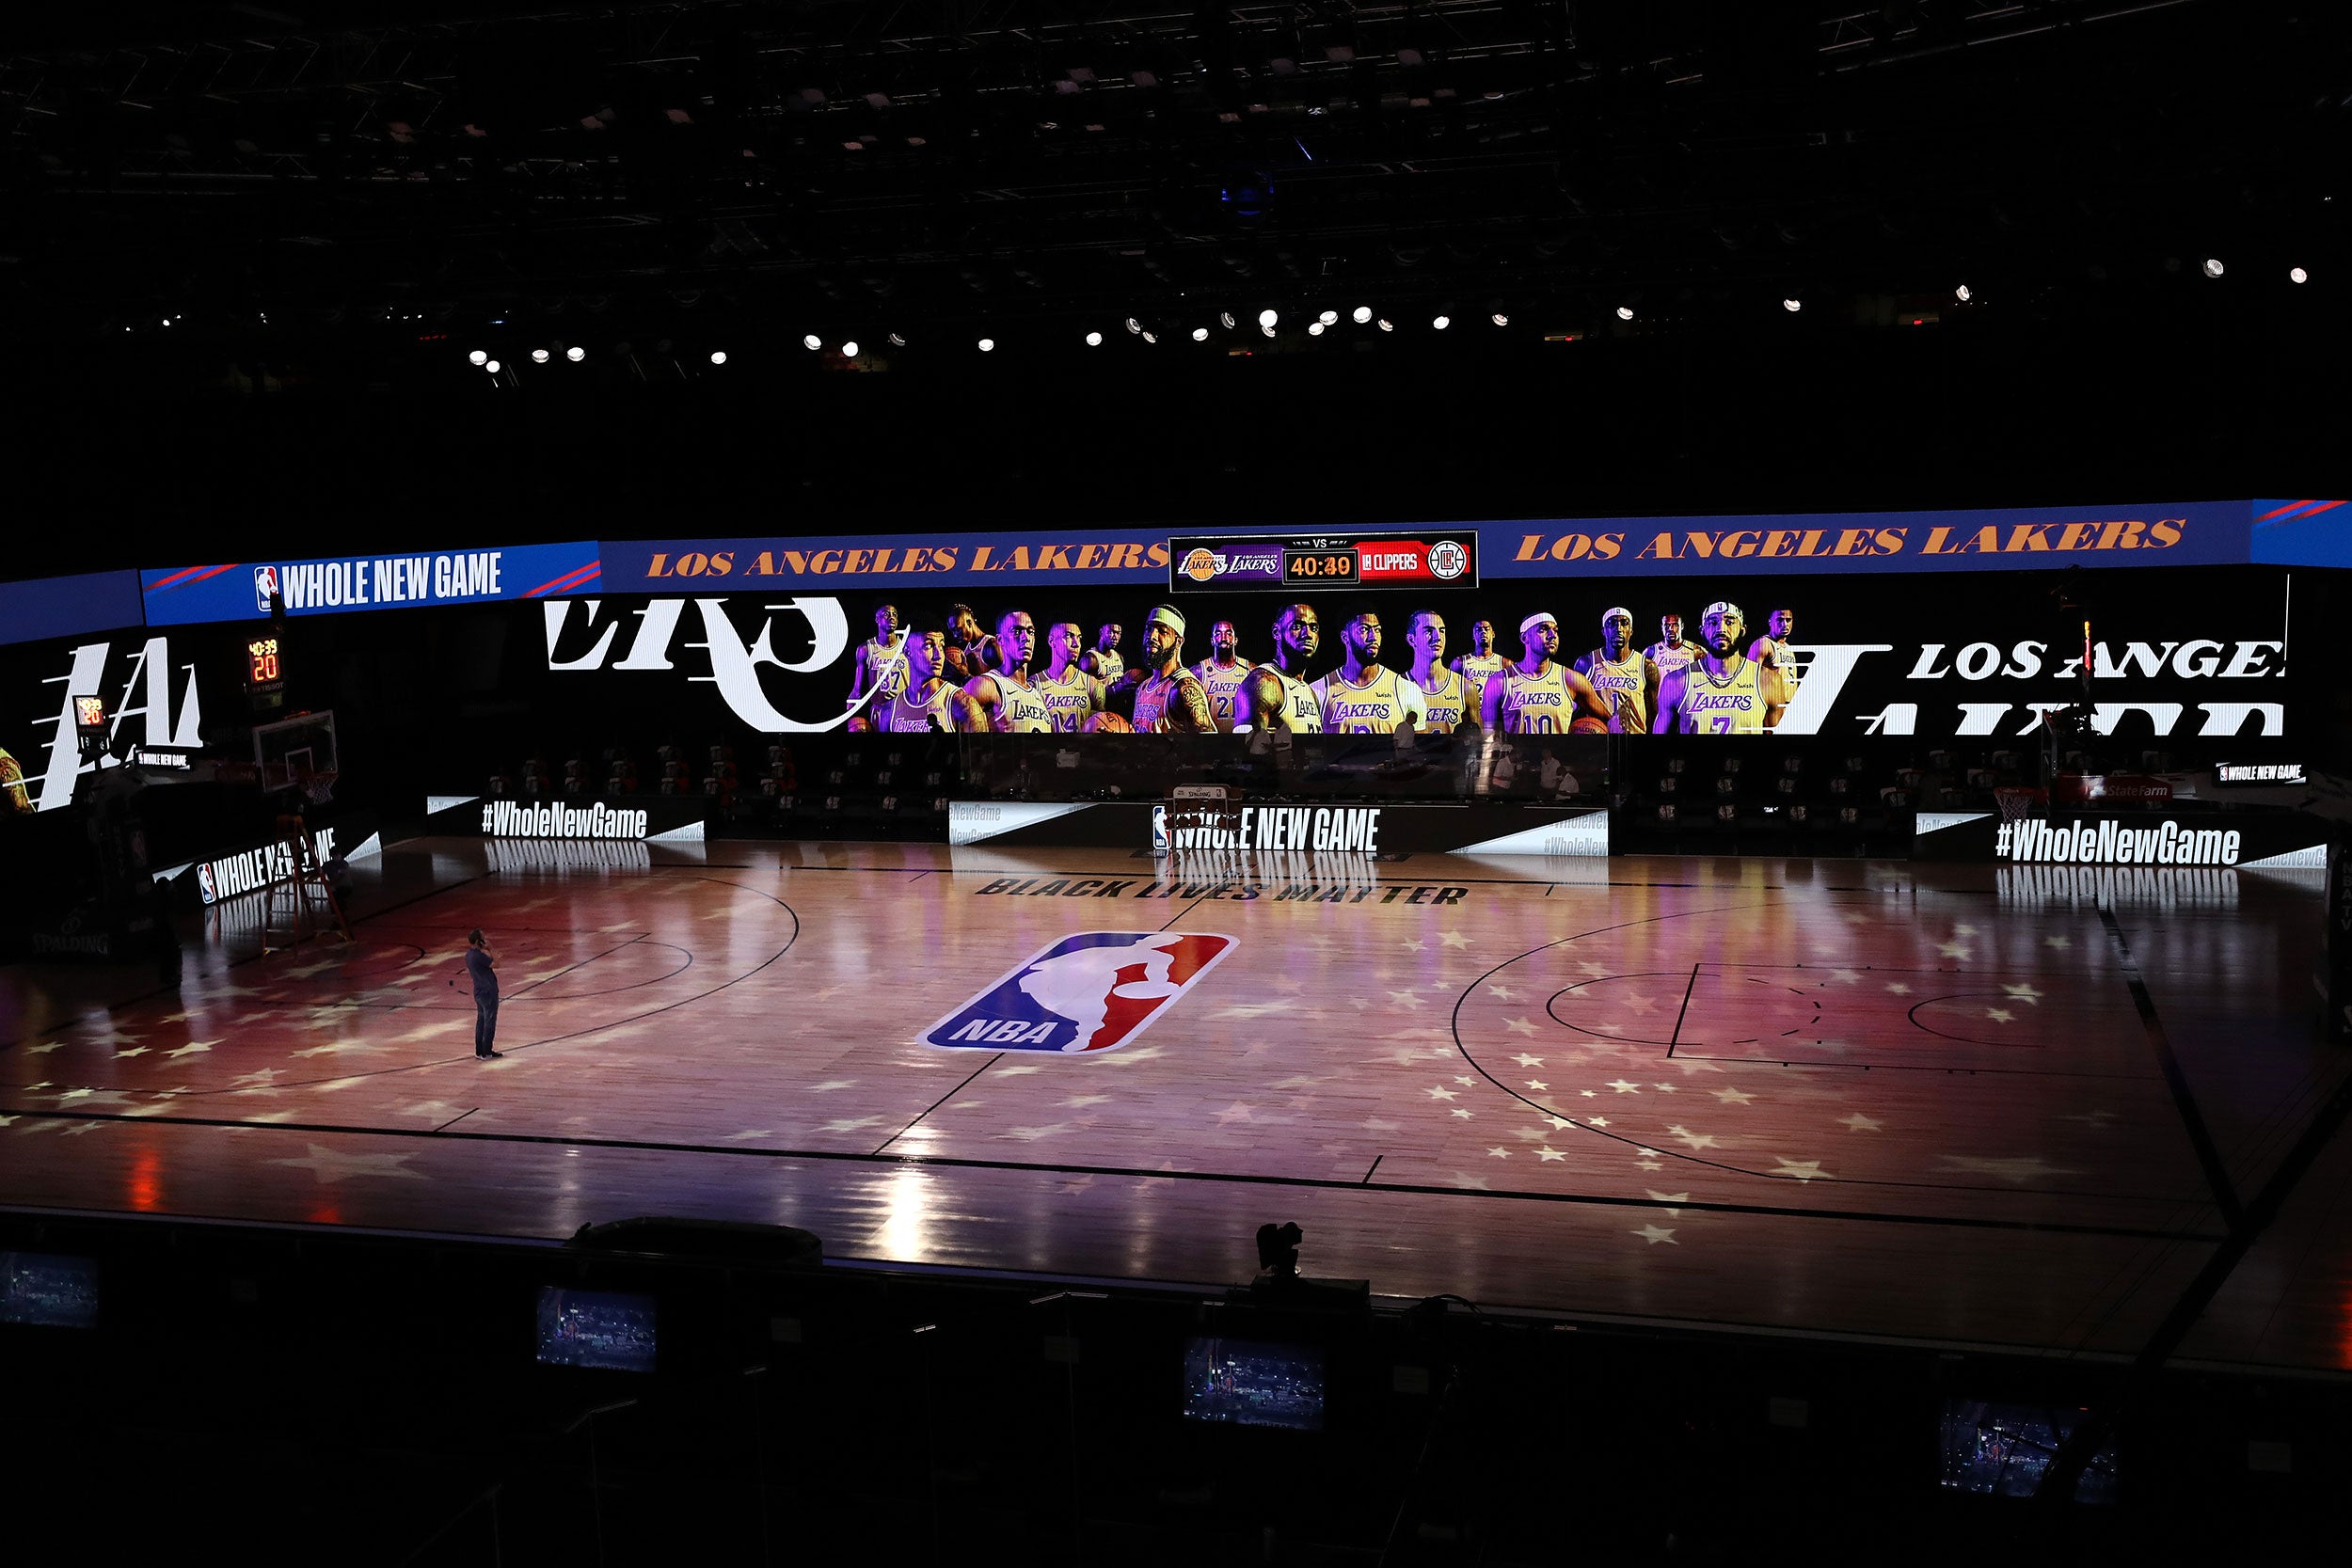 NBA players cover lost wages of arena workers after coronavirus